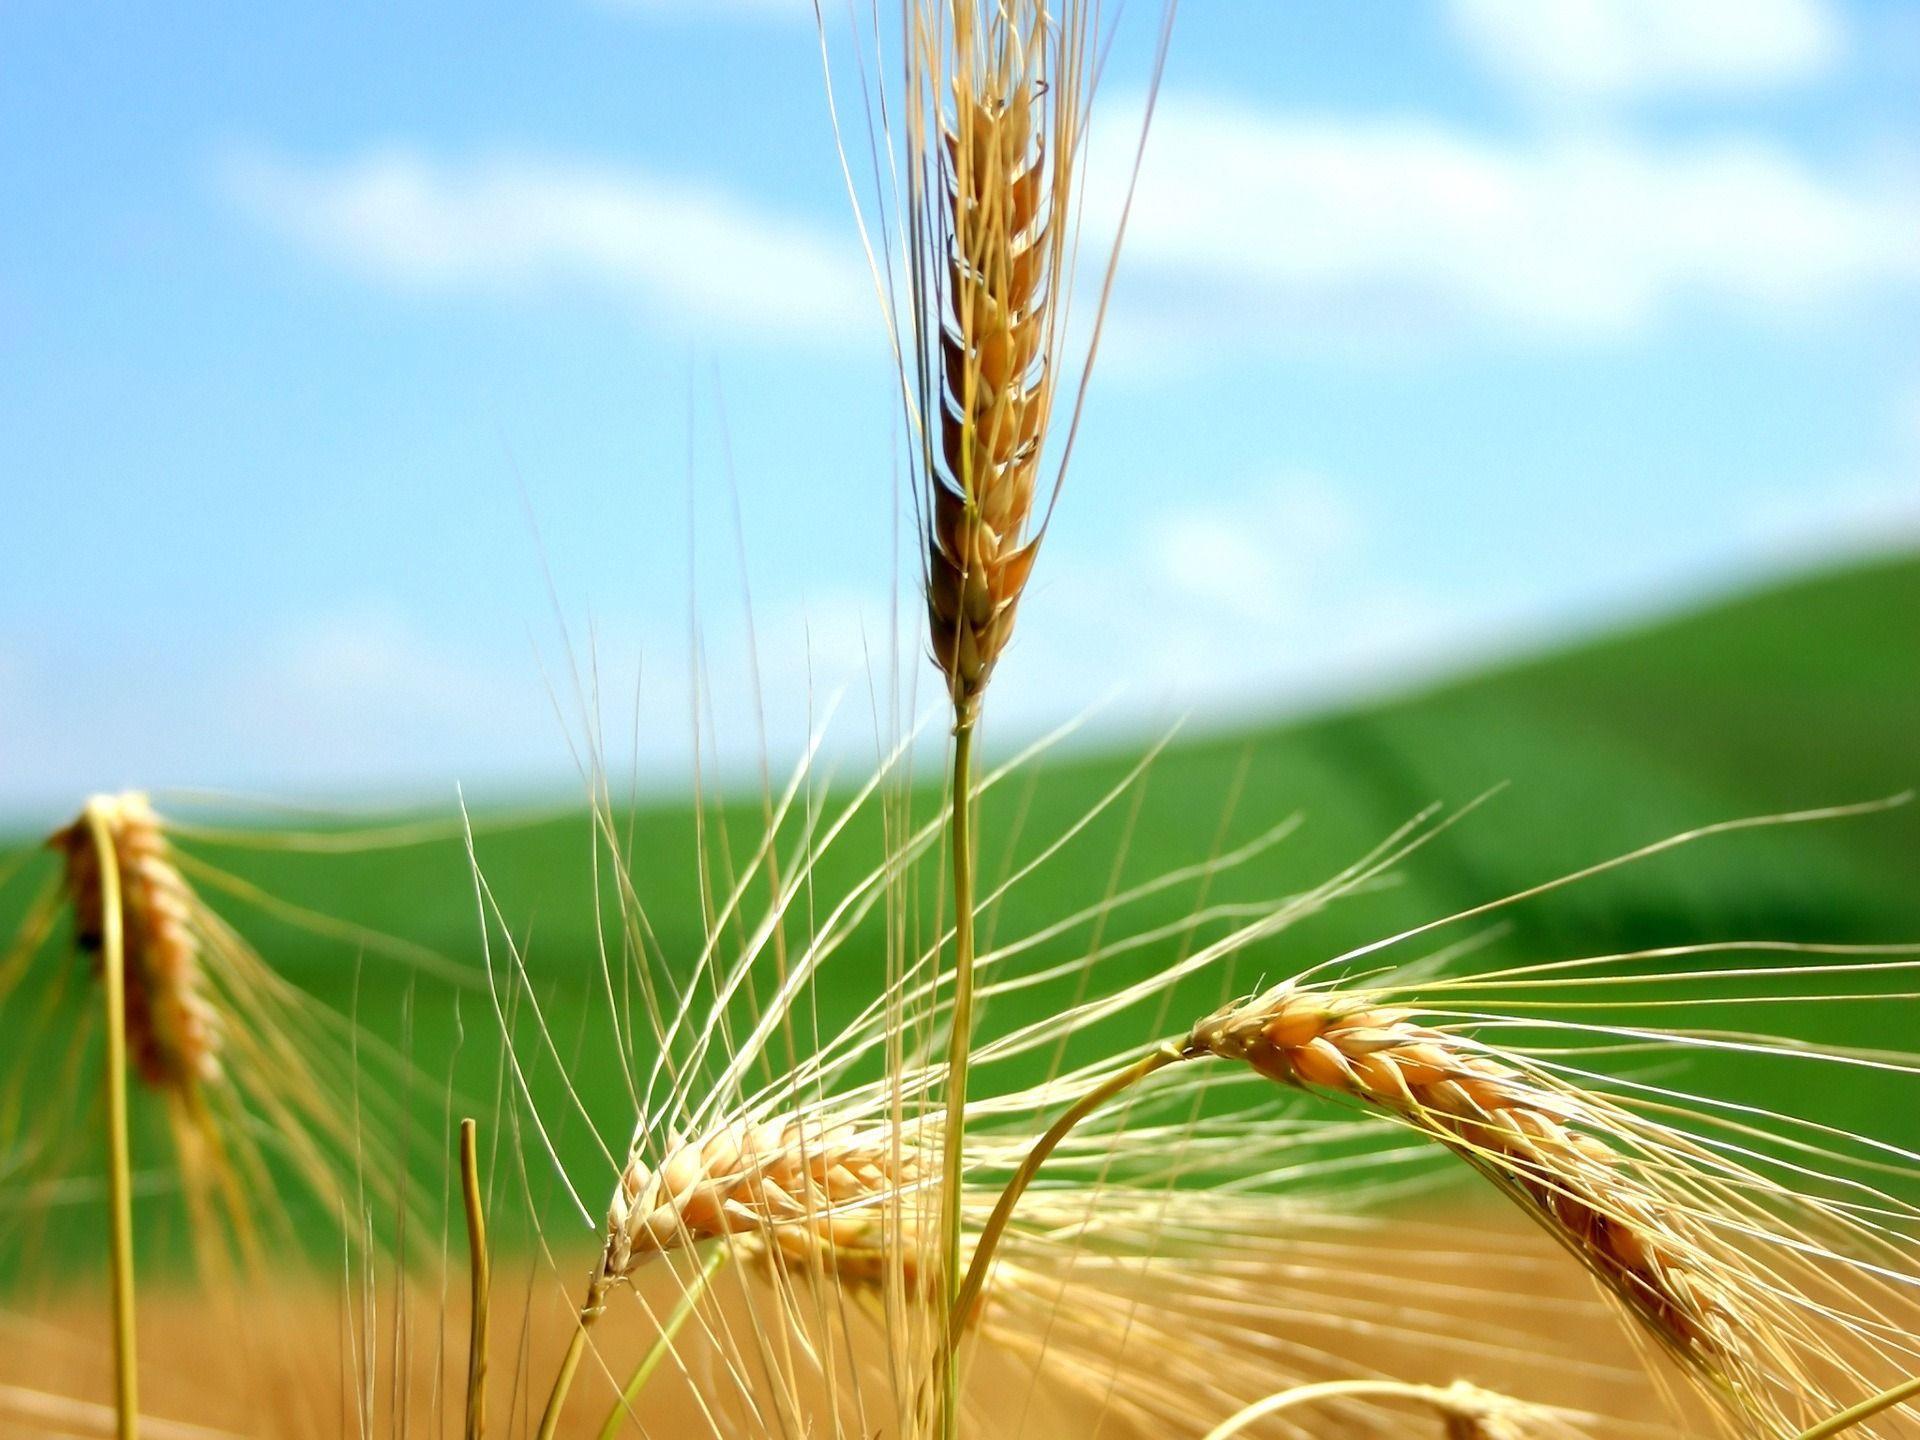 Wheat Wallpapers Plants Nature Wallpapers in jpg format for free